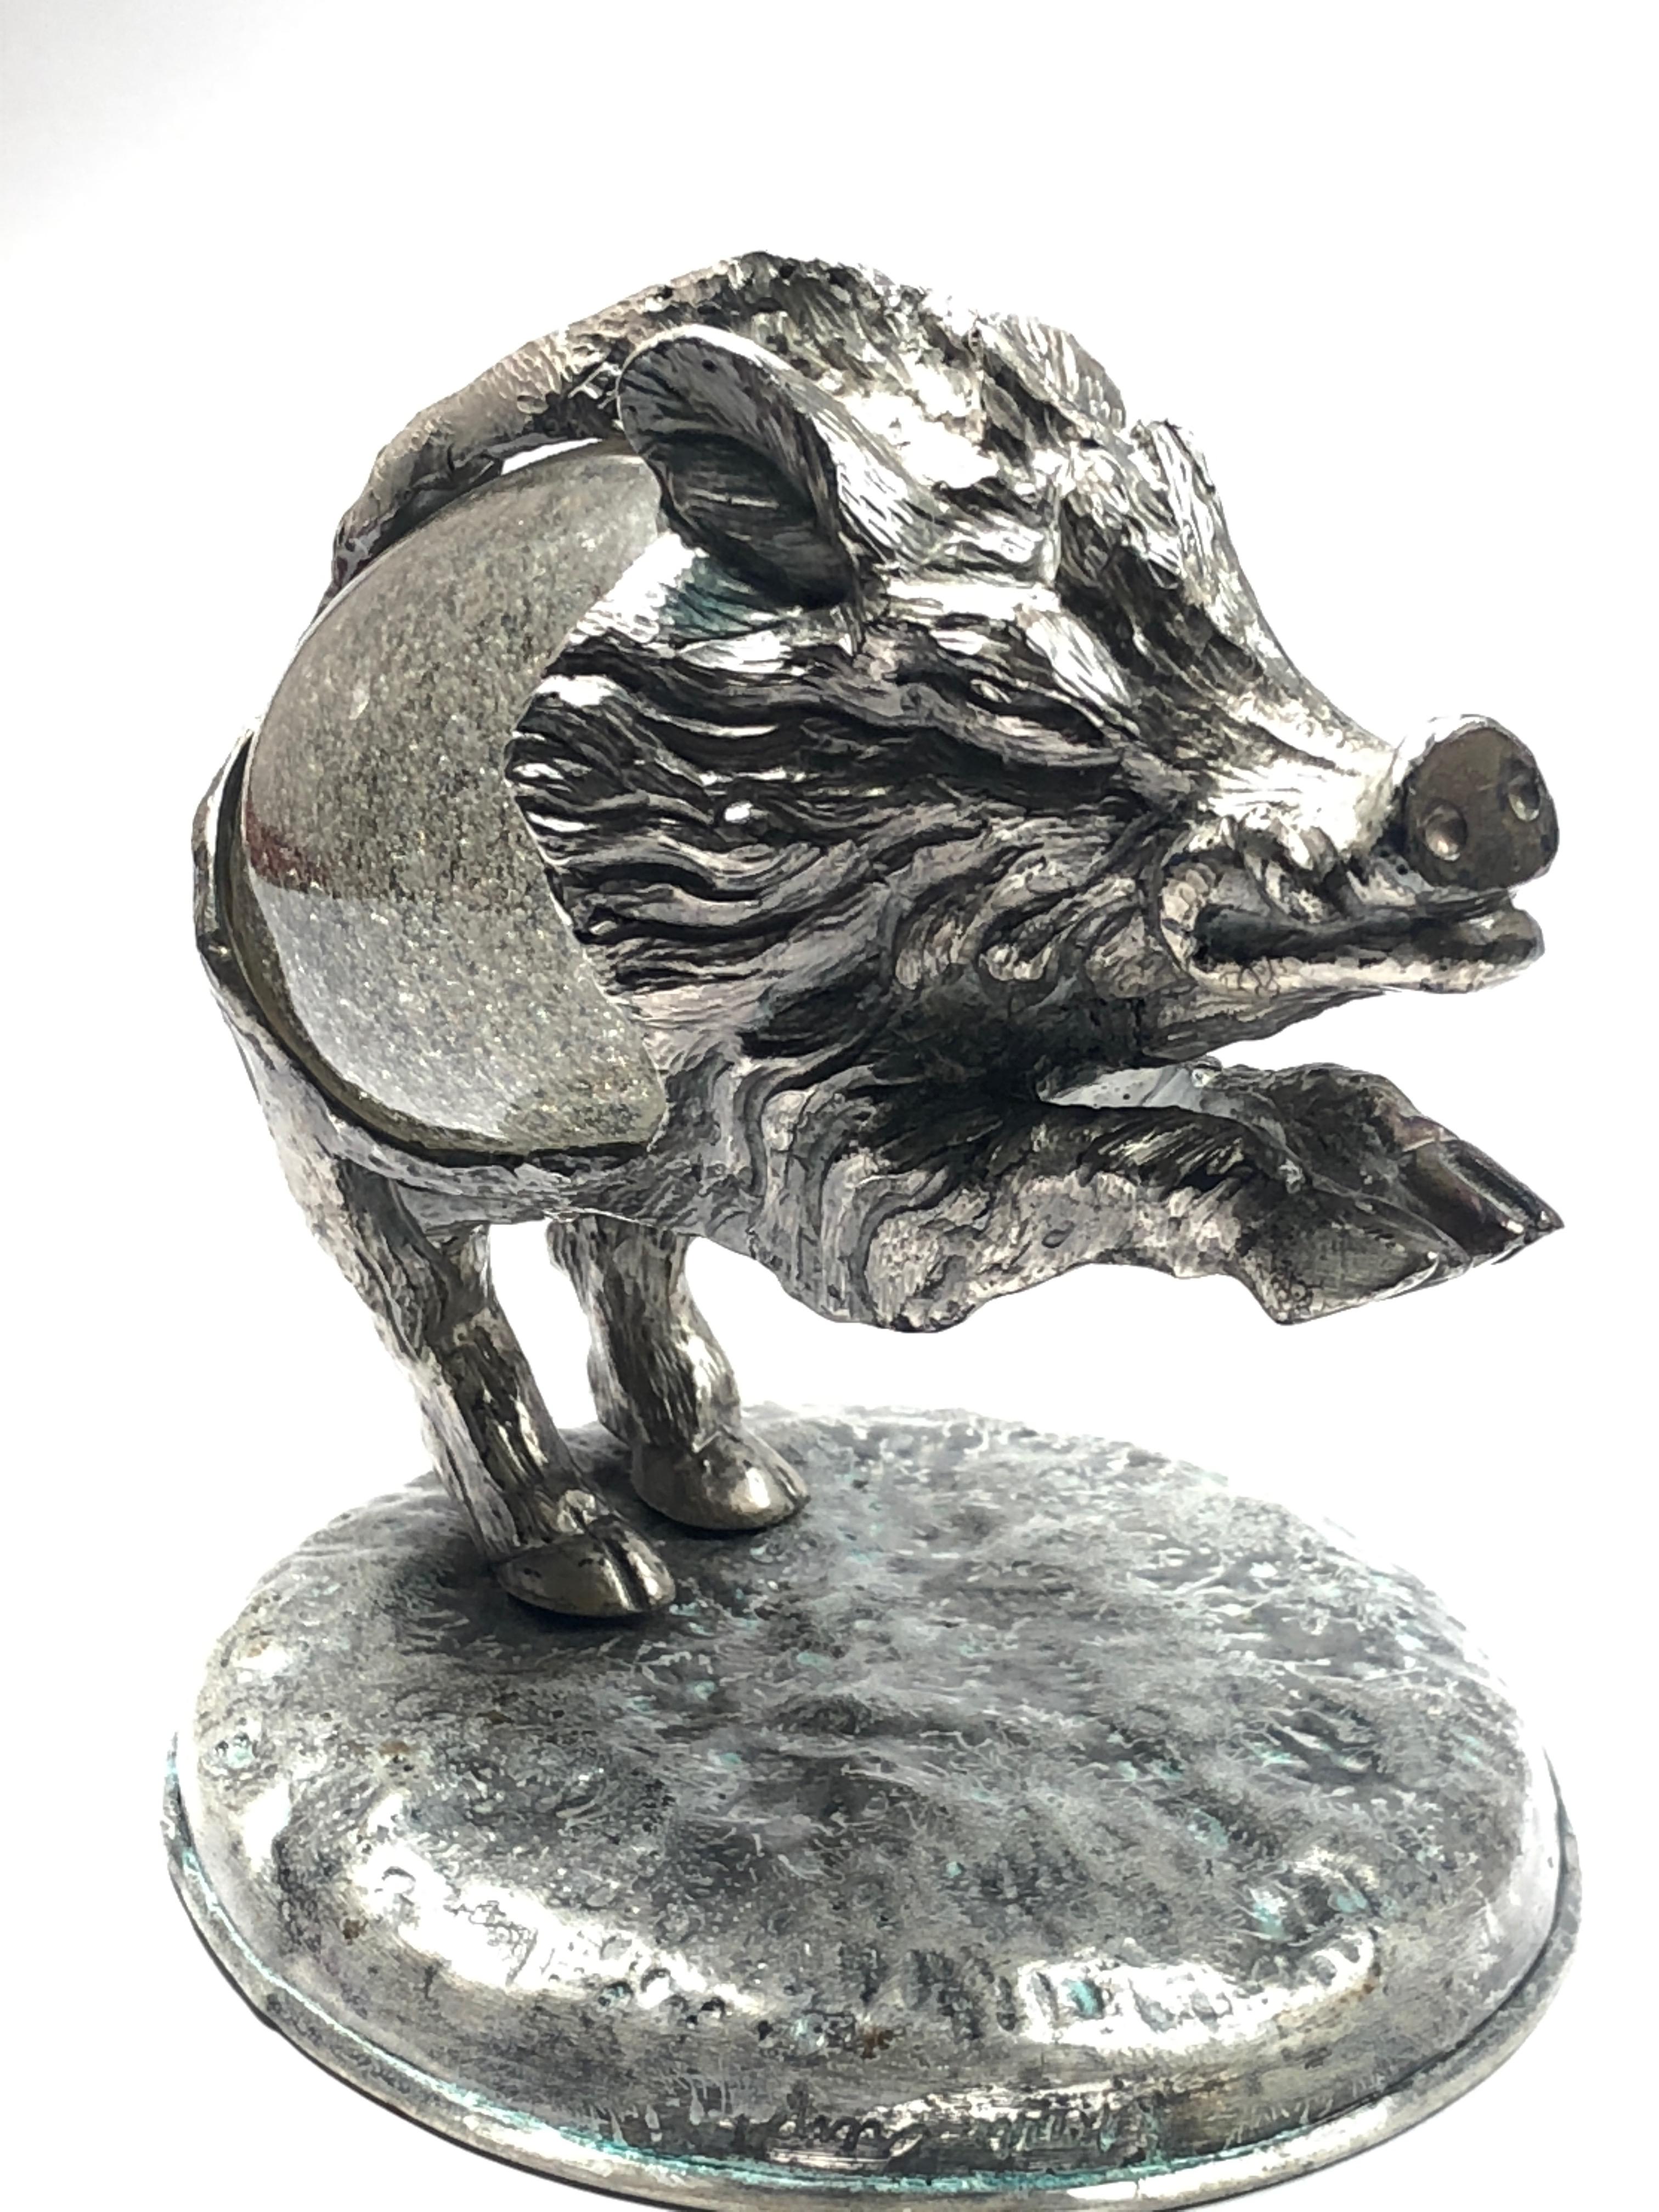 Rare Signed Gabriella Crespi Wild Boar Sculpture, 1970s, Italy In Excellent Condition For Sale In Vis, NL